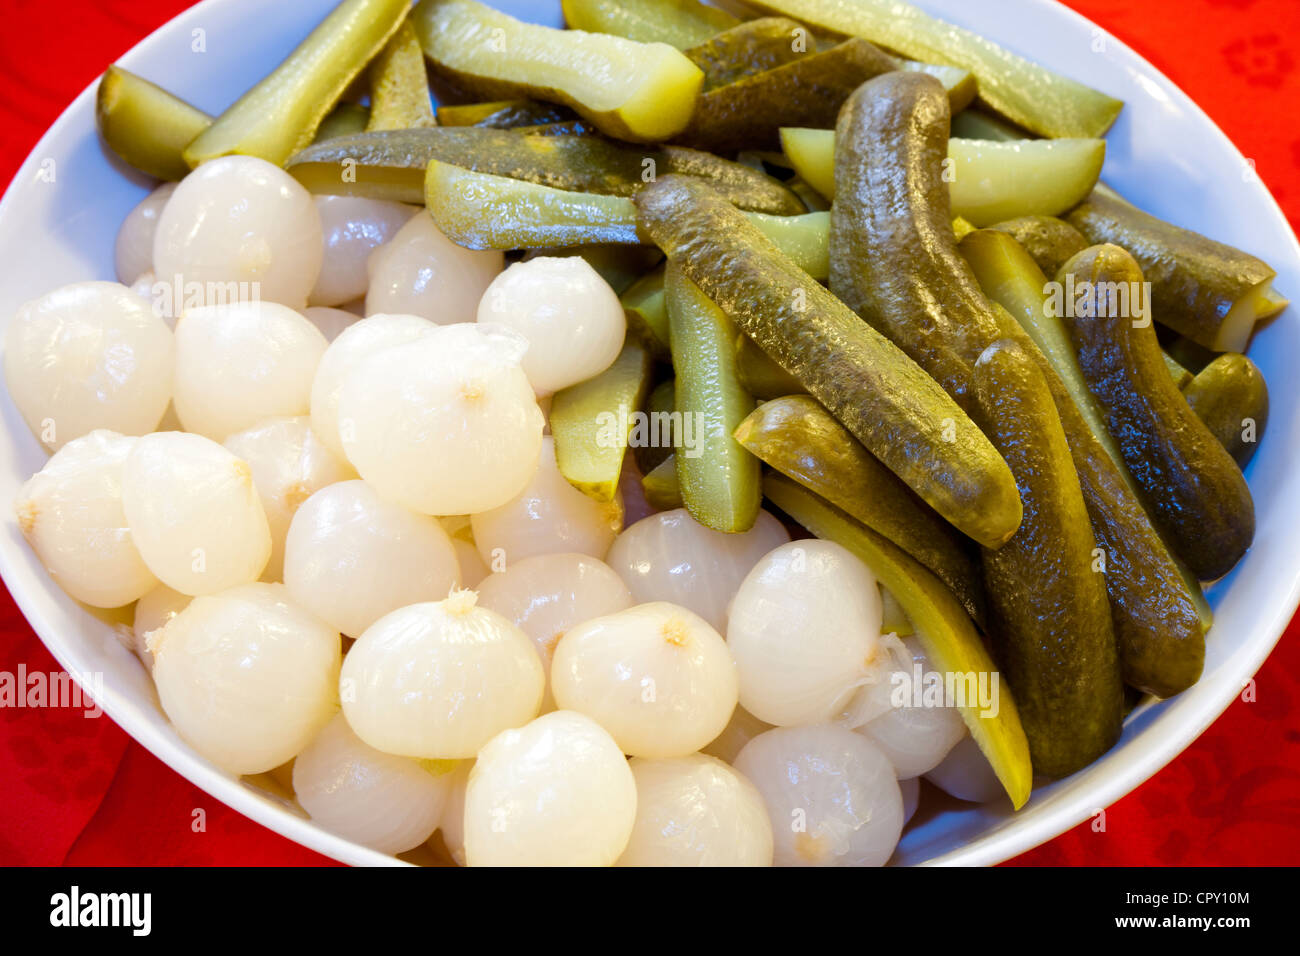 a plate of pearl onions and pickles Stock Photo